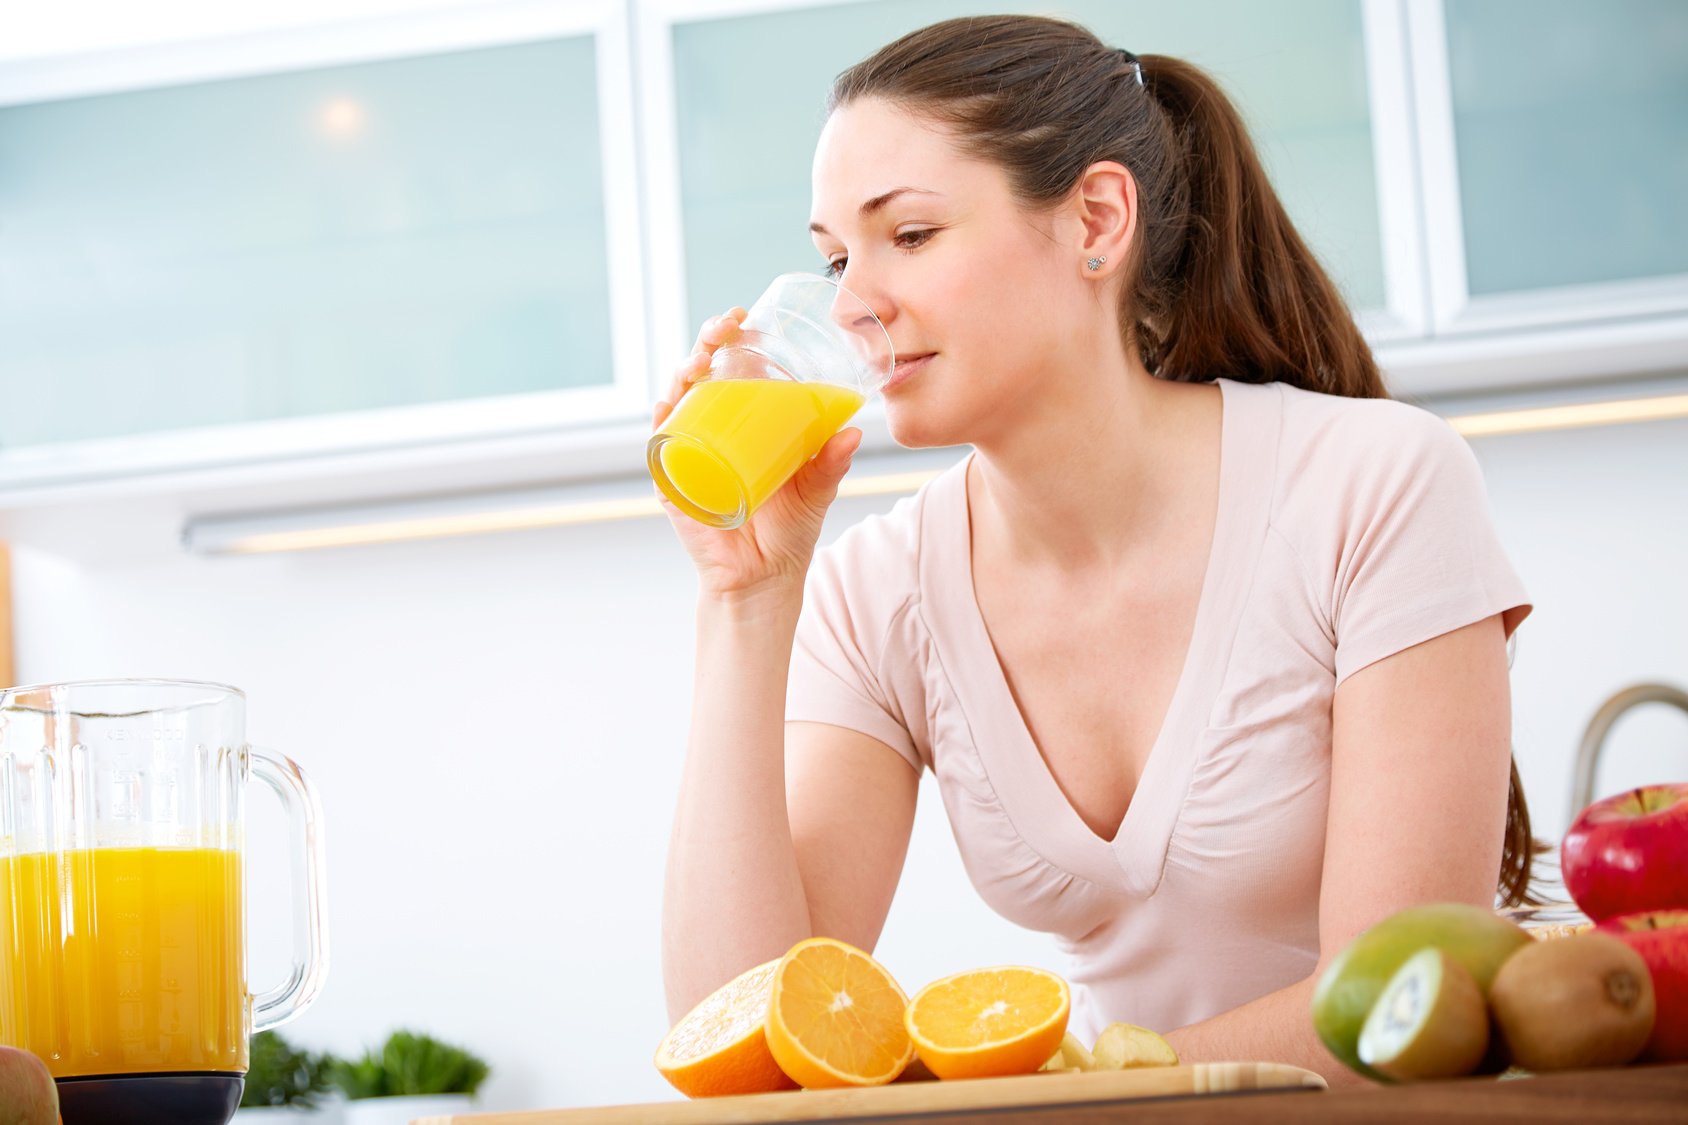 Portrait of young woman drinking orange Juice